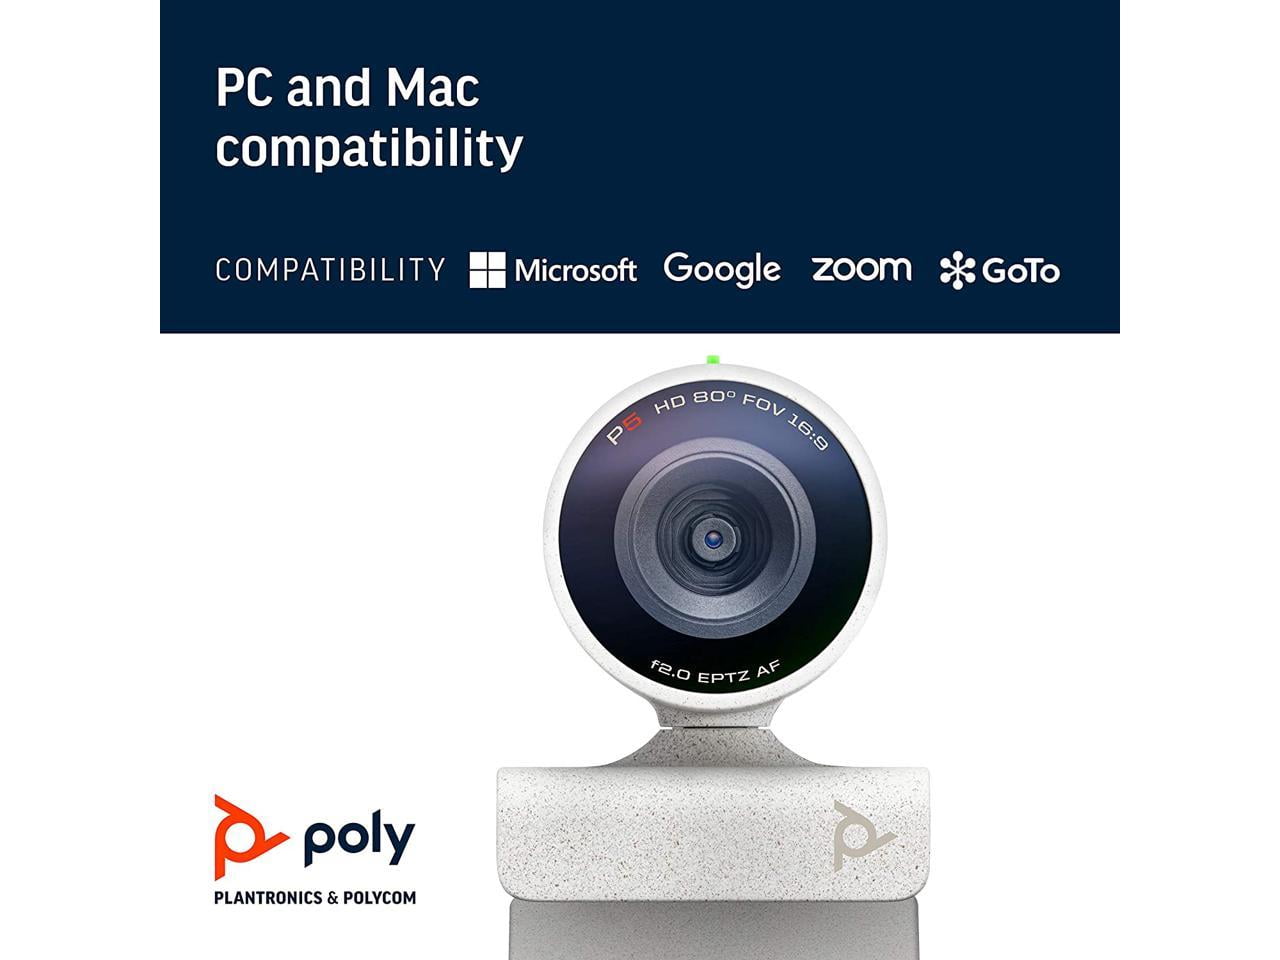 Poly - Studio P5 Webcam with Blackwire 3210 Headset Kit (Plantronics +  Polycom) - 1080p HD Professional Video Conferencing Camera & Single-Ear  Wired Headset USB-A - Certified for Zoom & Teams